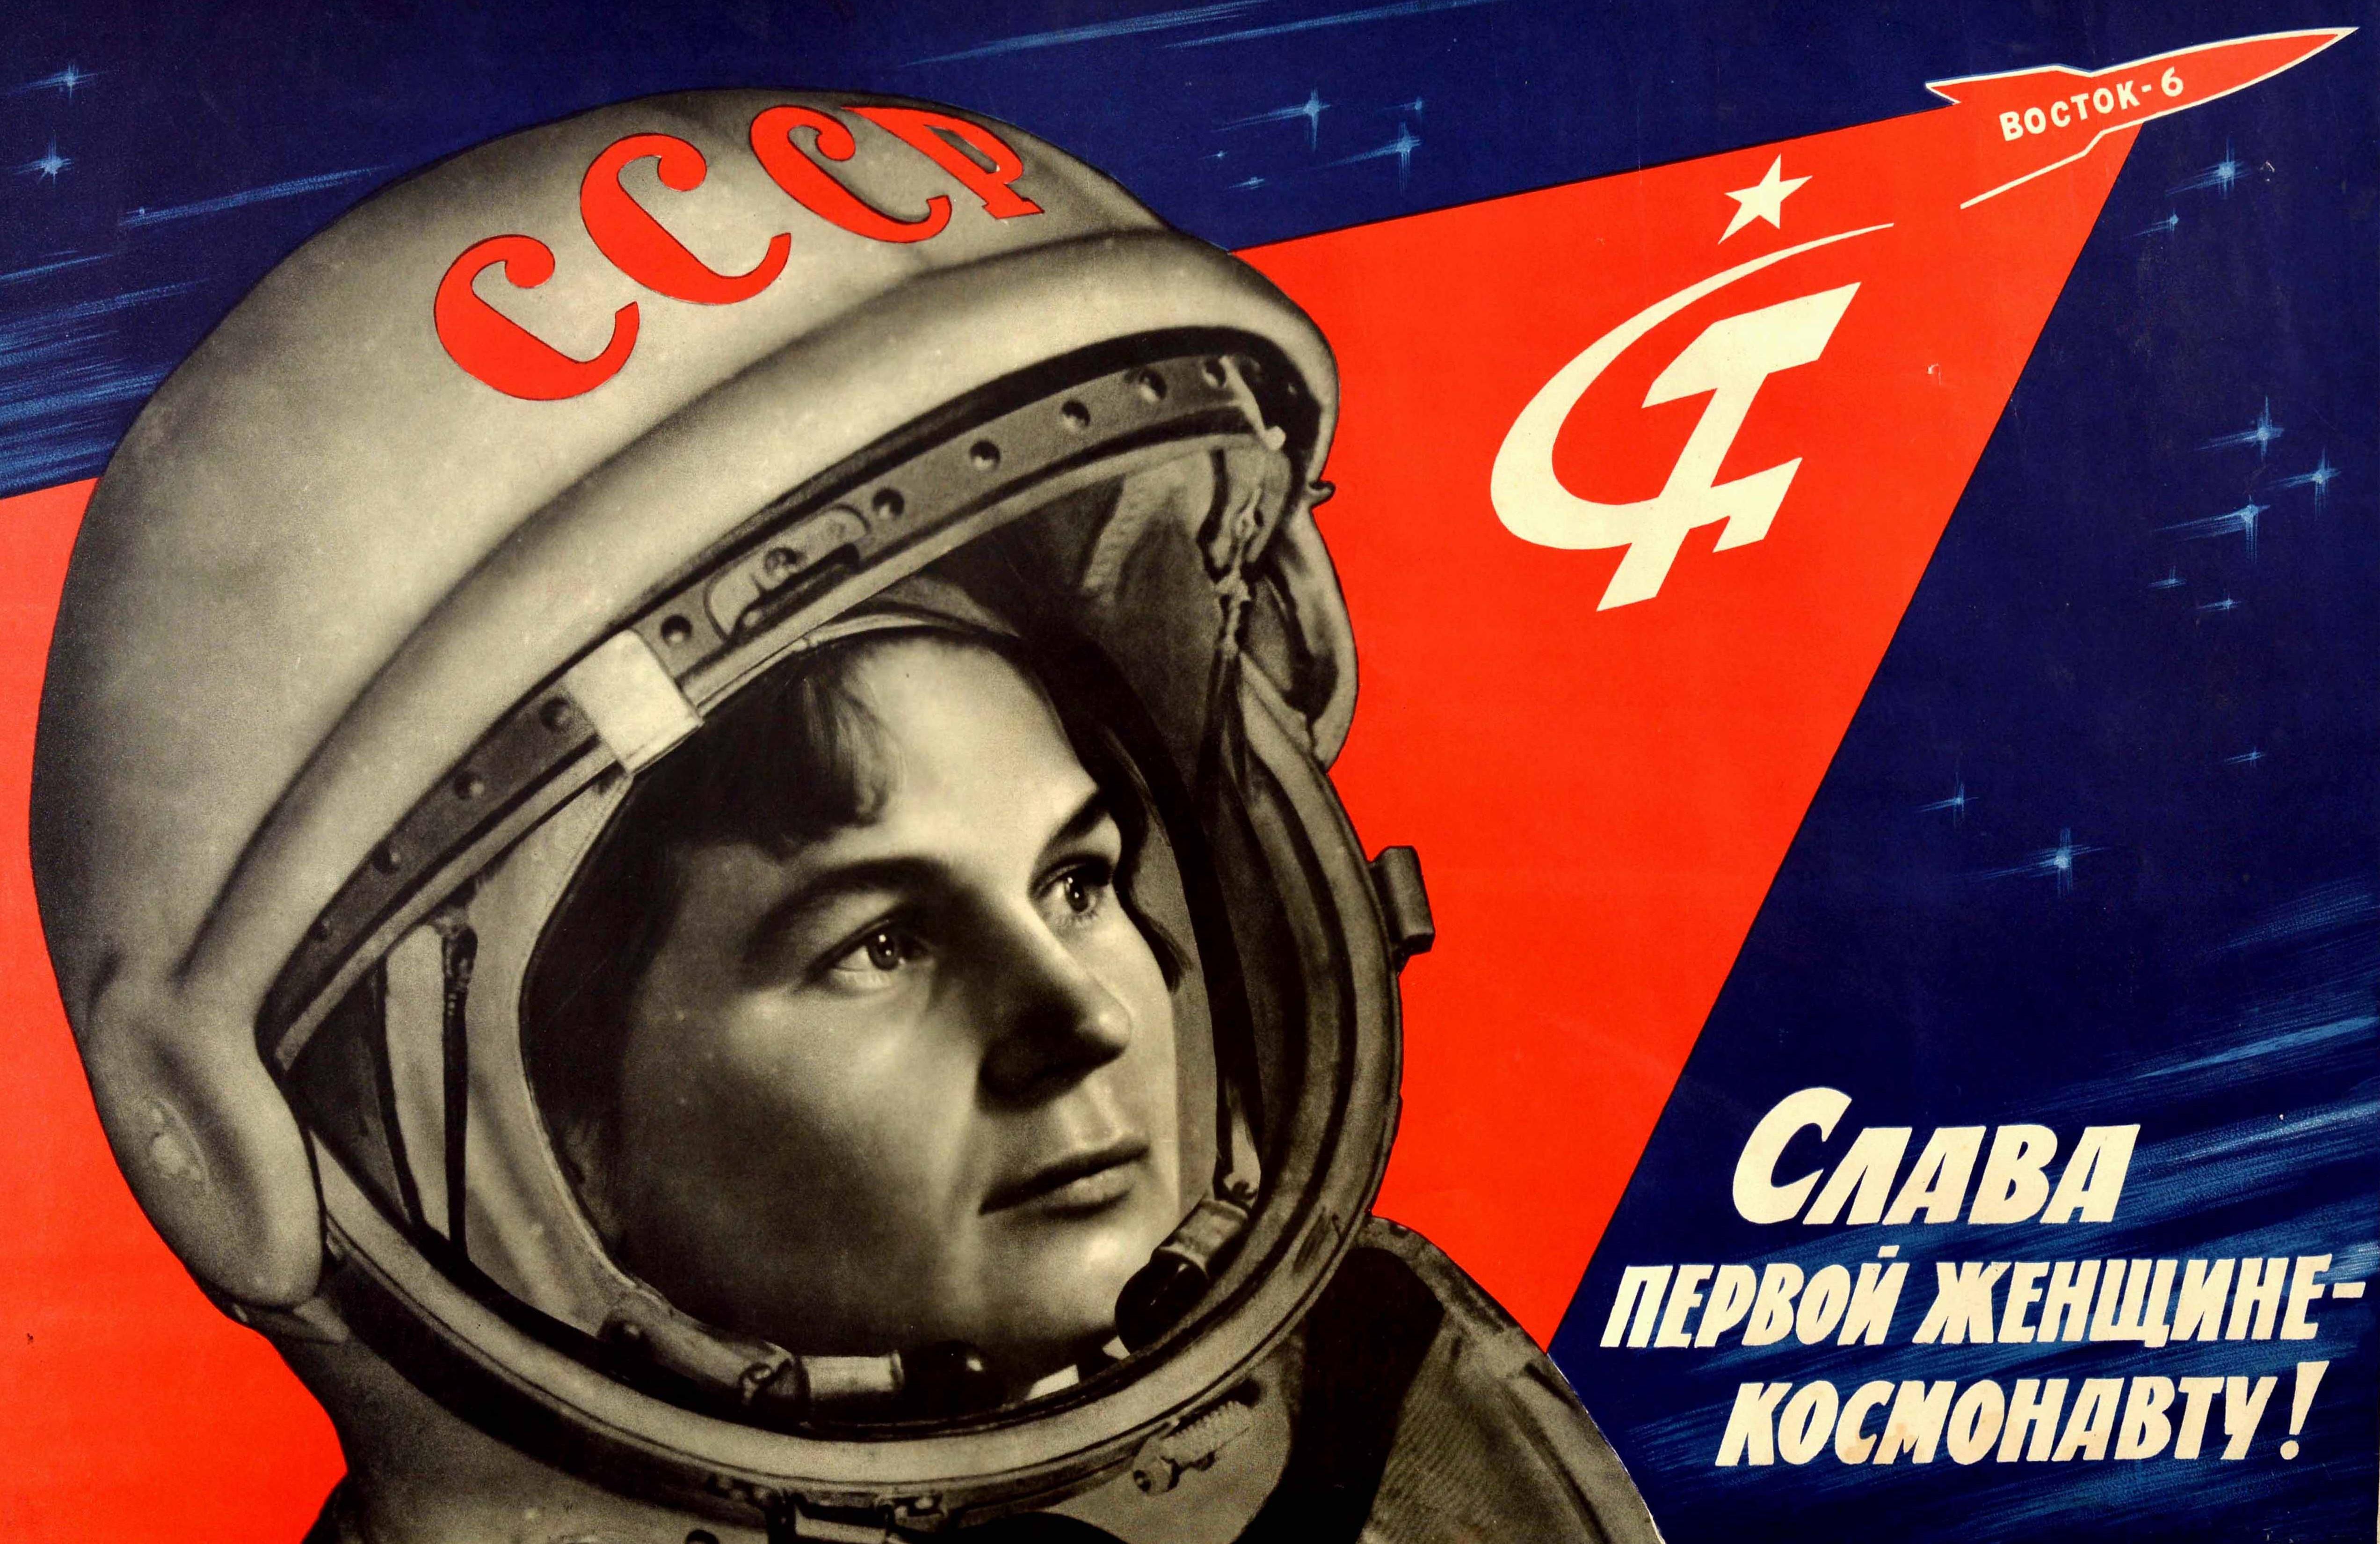 women in space posters